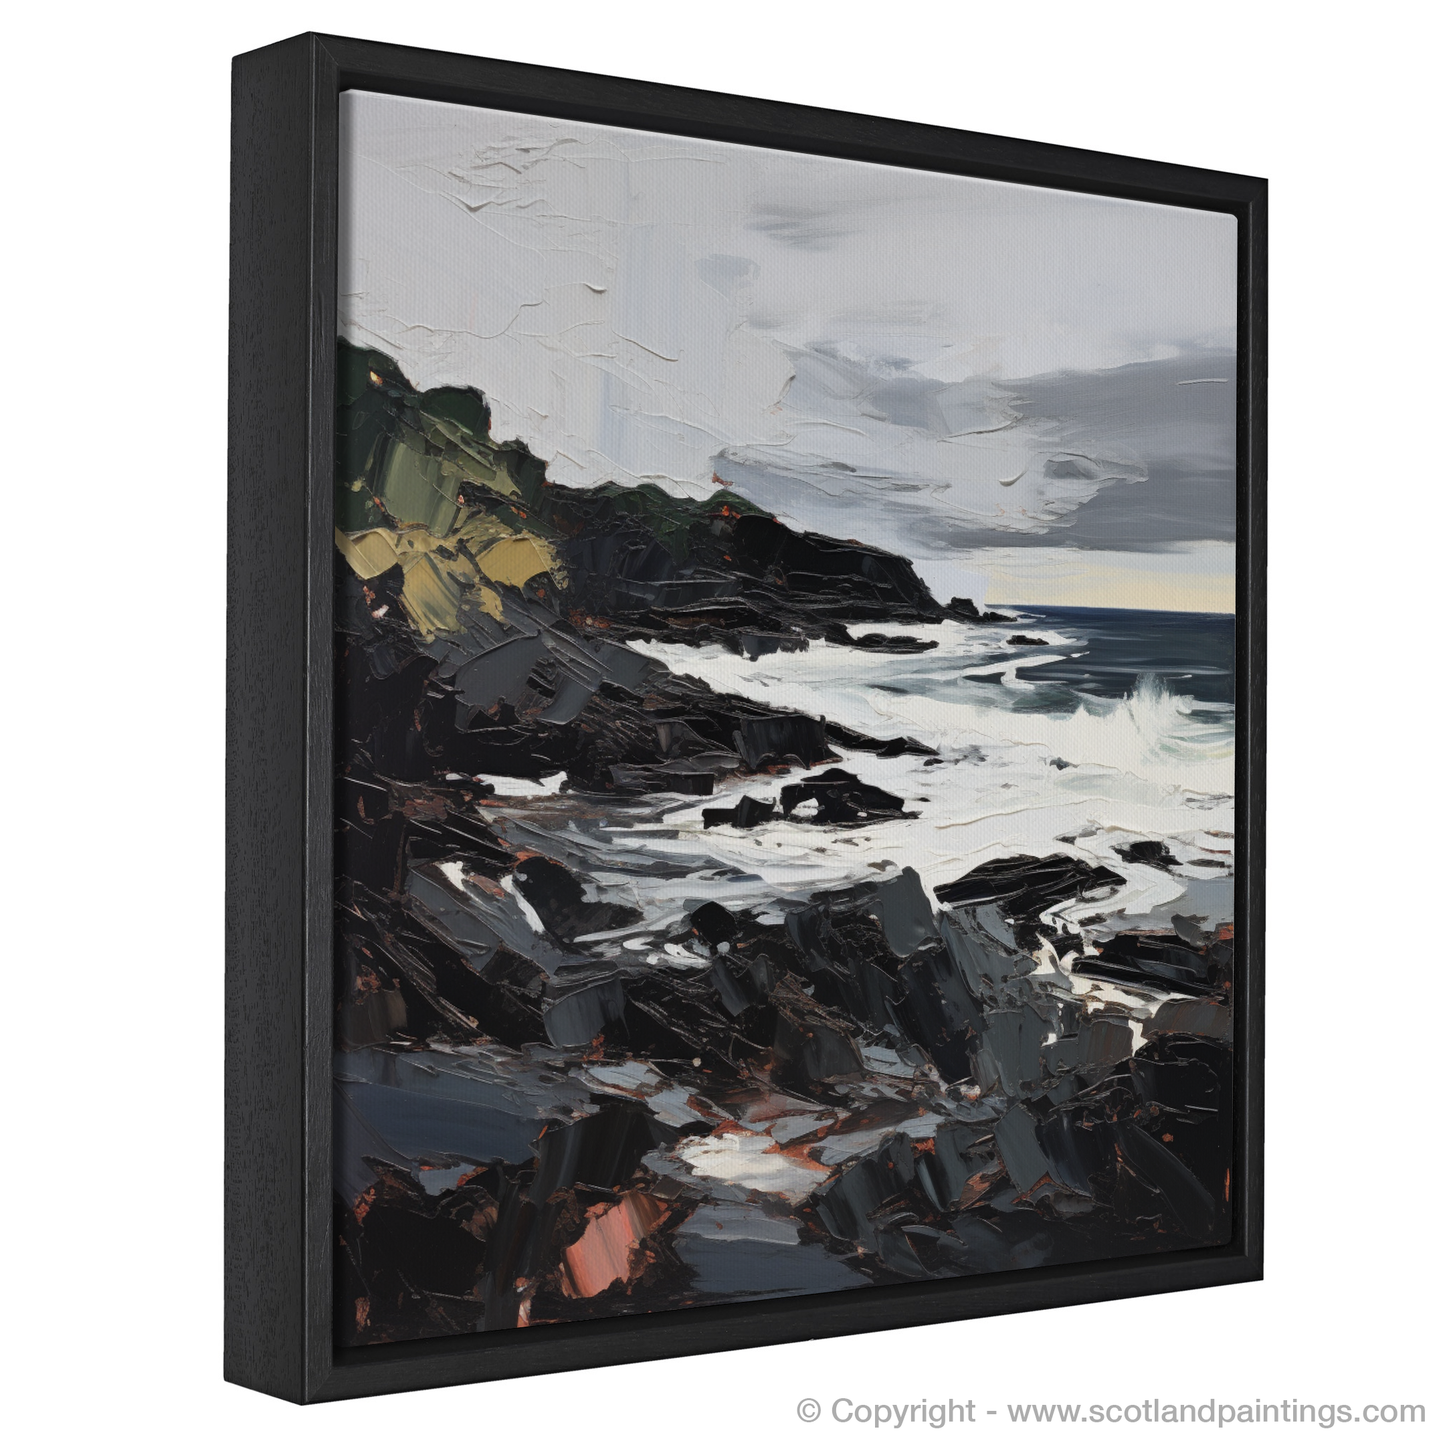 Painting and Art Print of Coldingham Bay with a stormy sky entitled "Stormy Essence of Coldingham Bay".